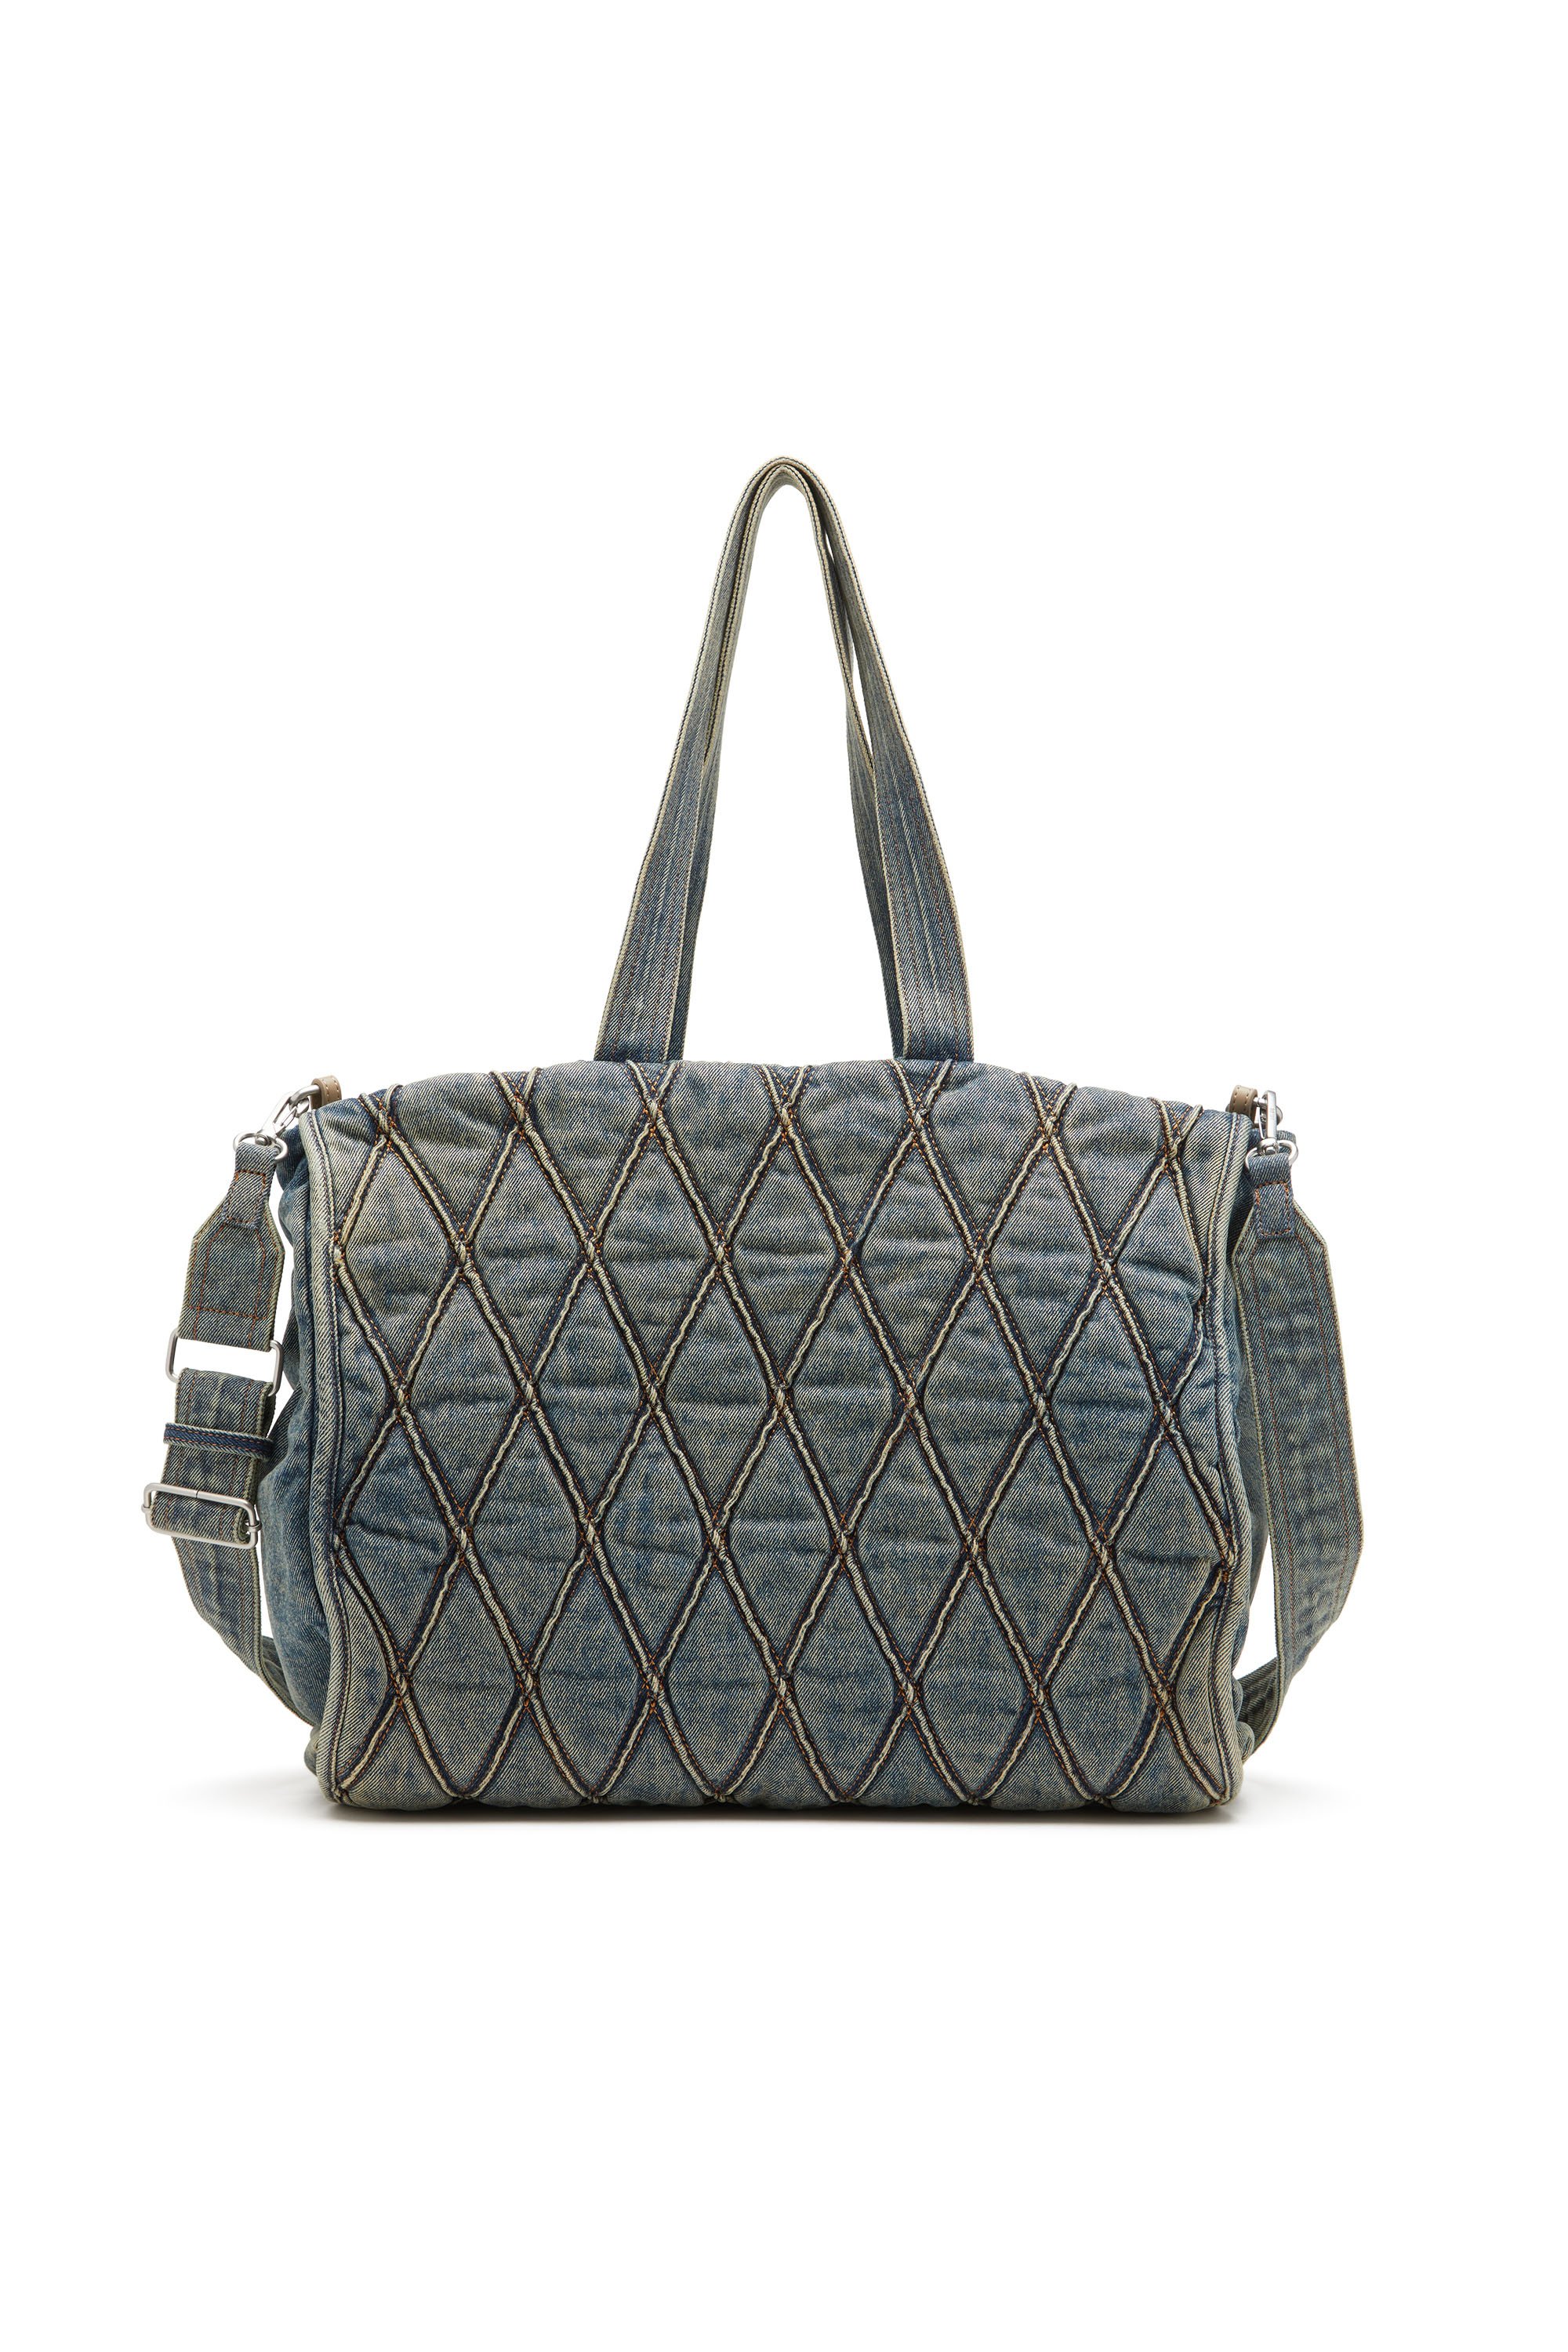 Diesel - CHARM-D SHOPPER, Female Charm-D-Tote bag in Argyle quilted denim in Blue - Image 2